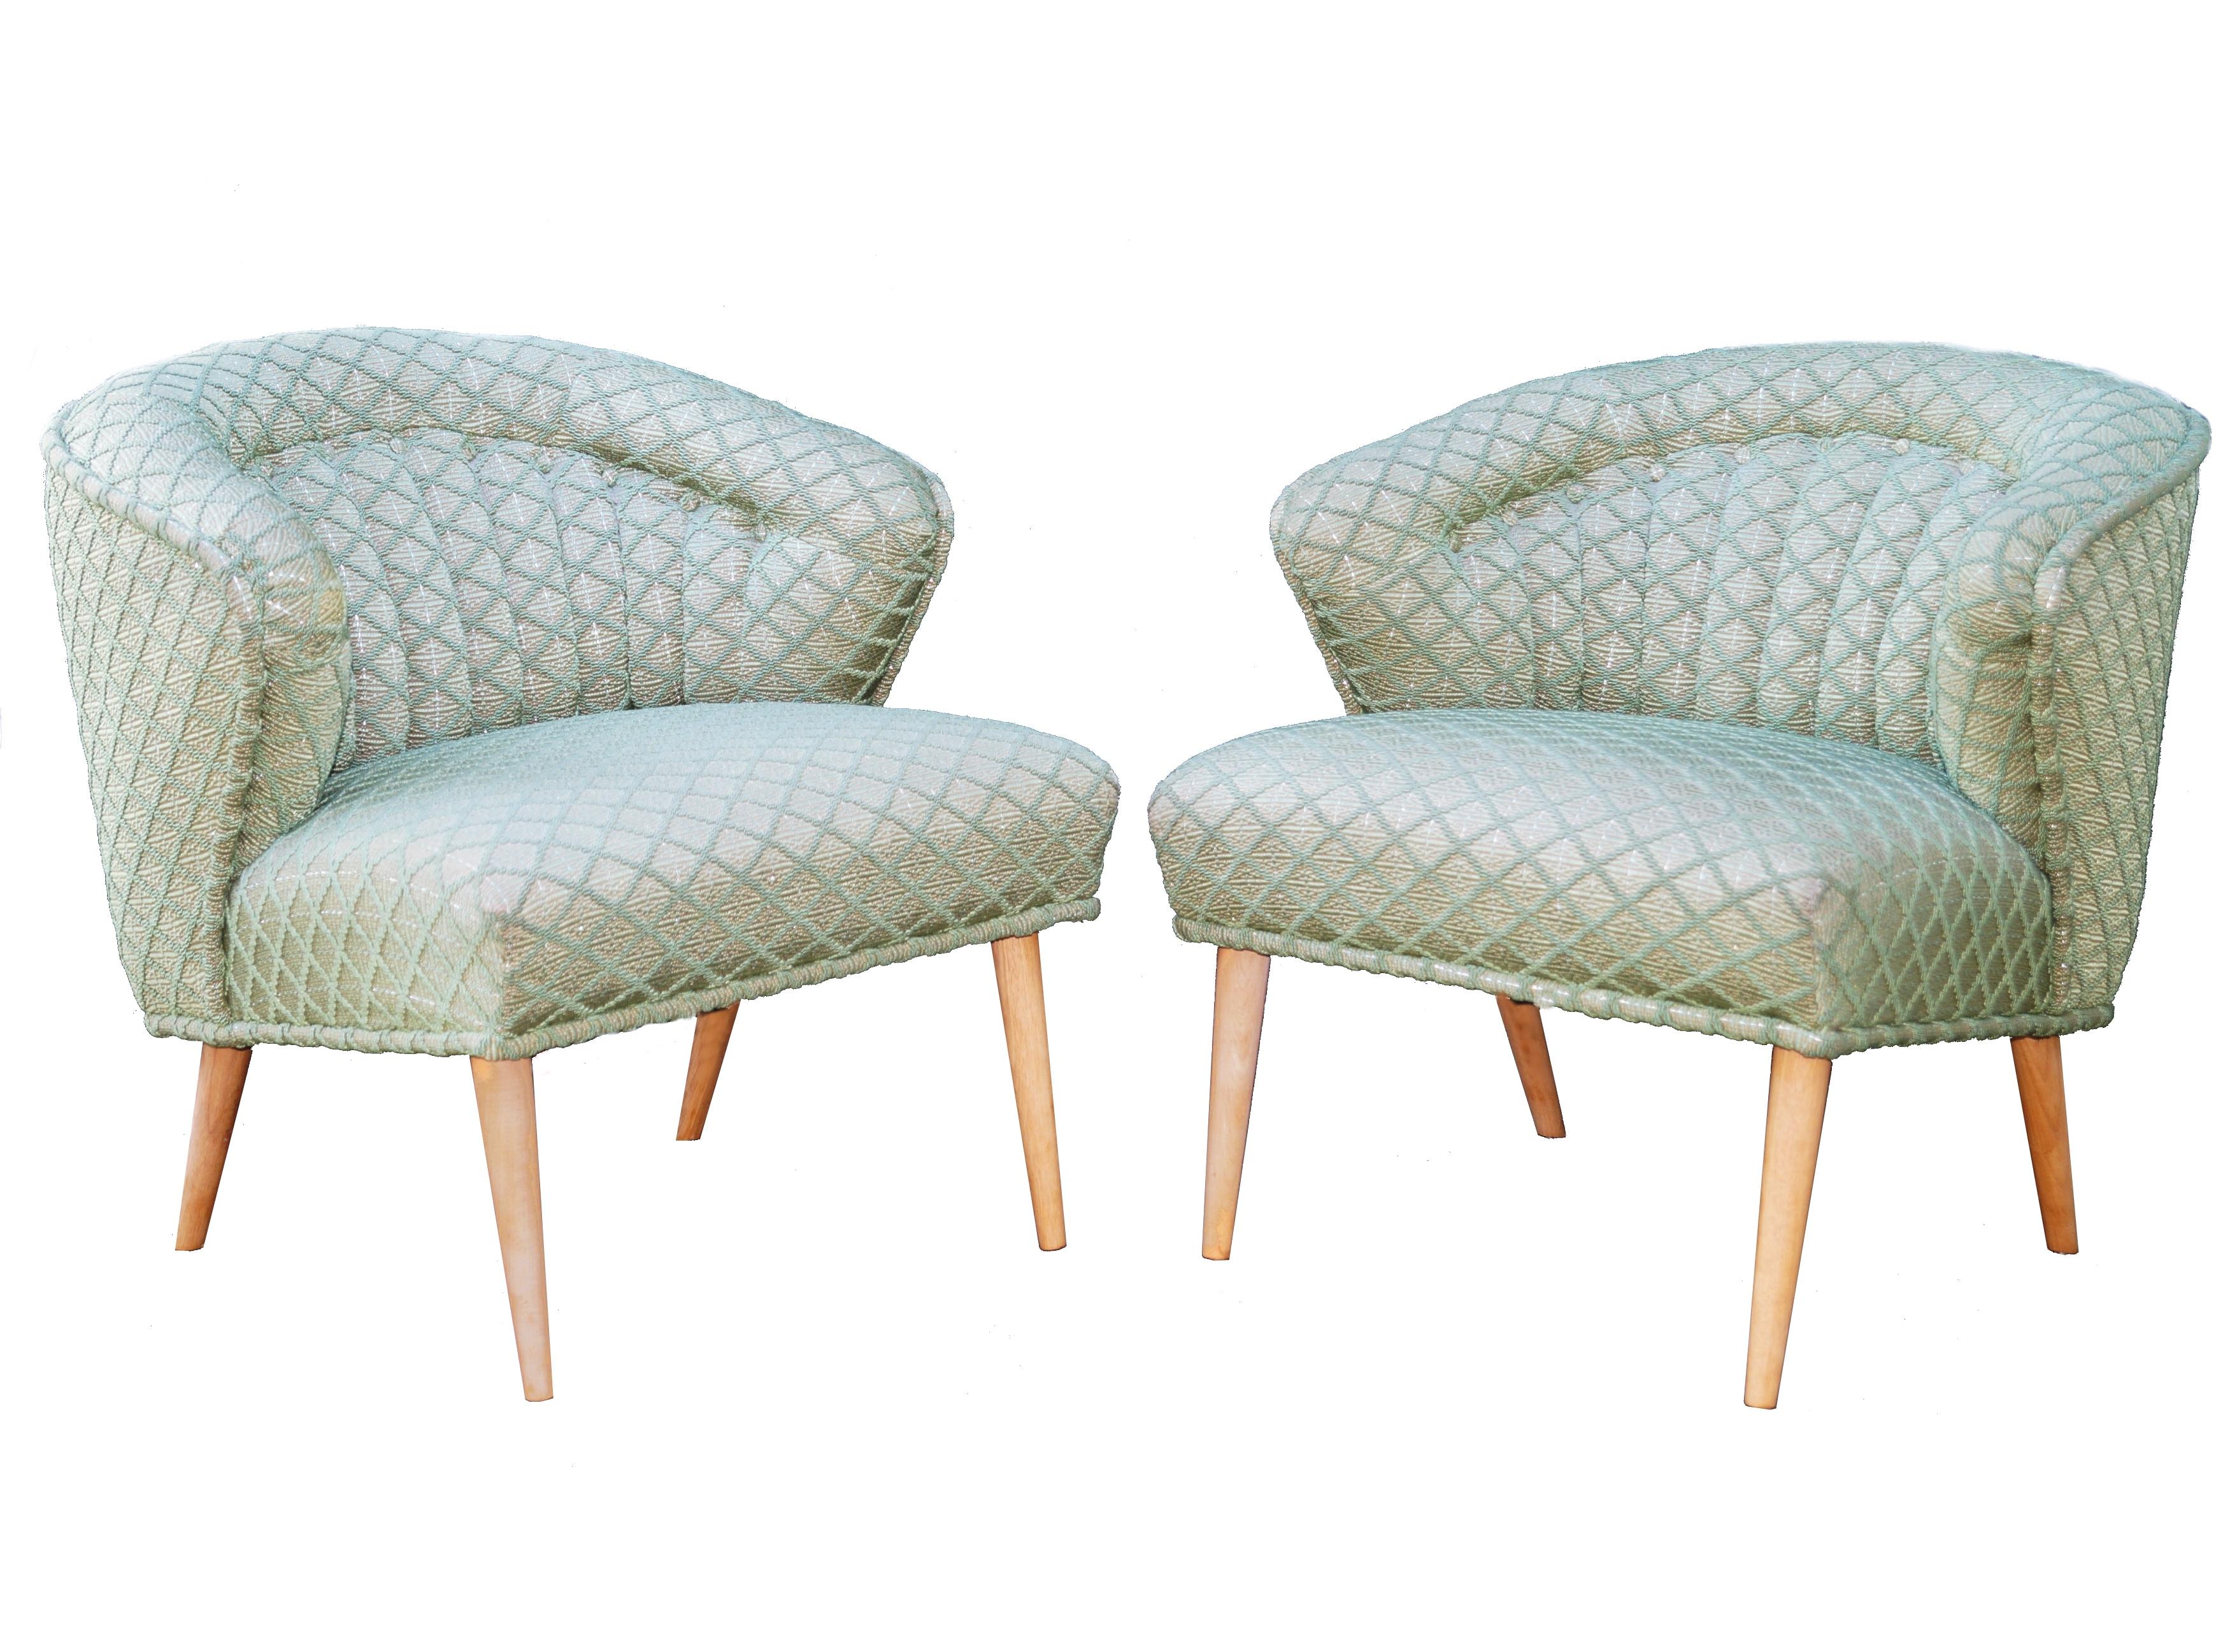 Pair of lounge or slipper chairs with tufted back in the manner of Billy Haines.